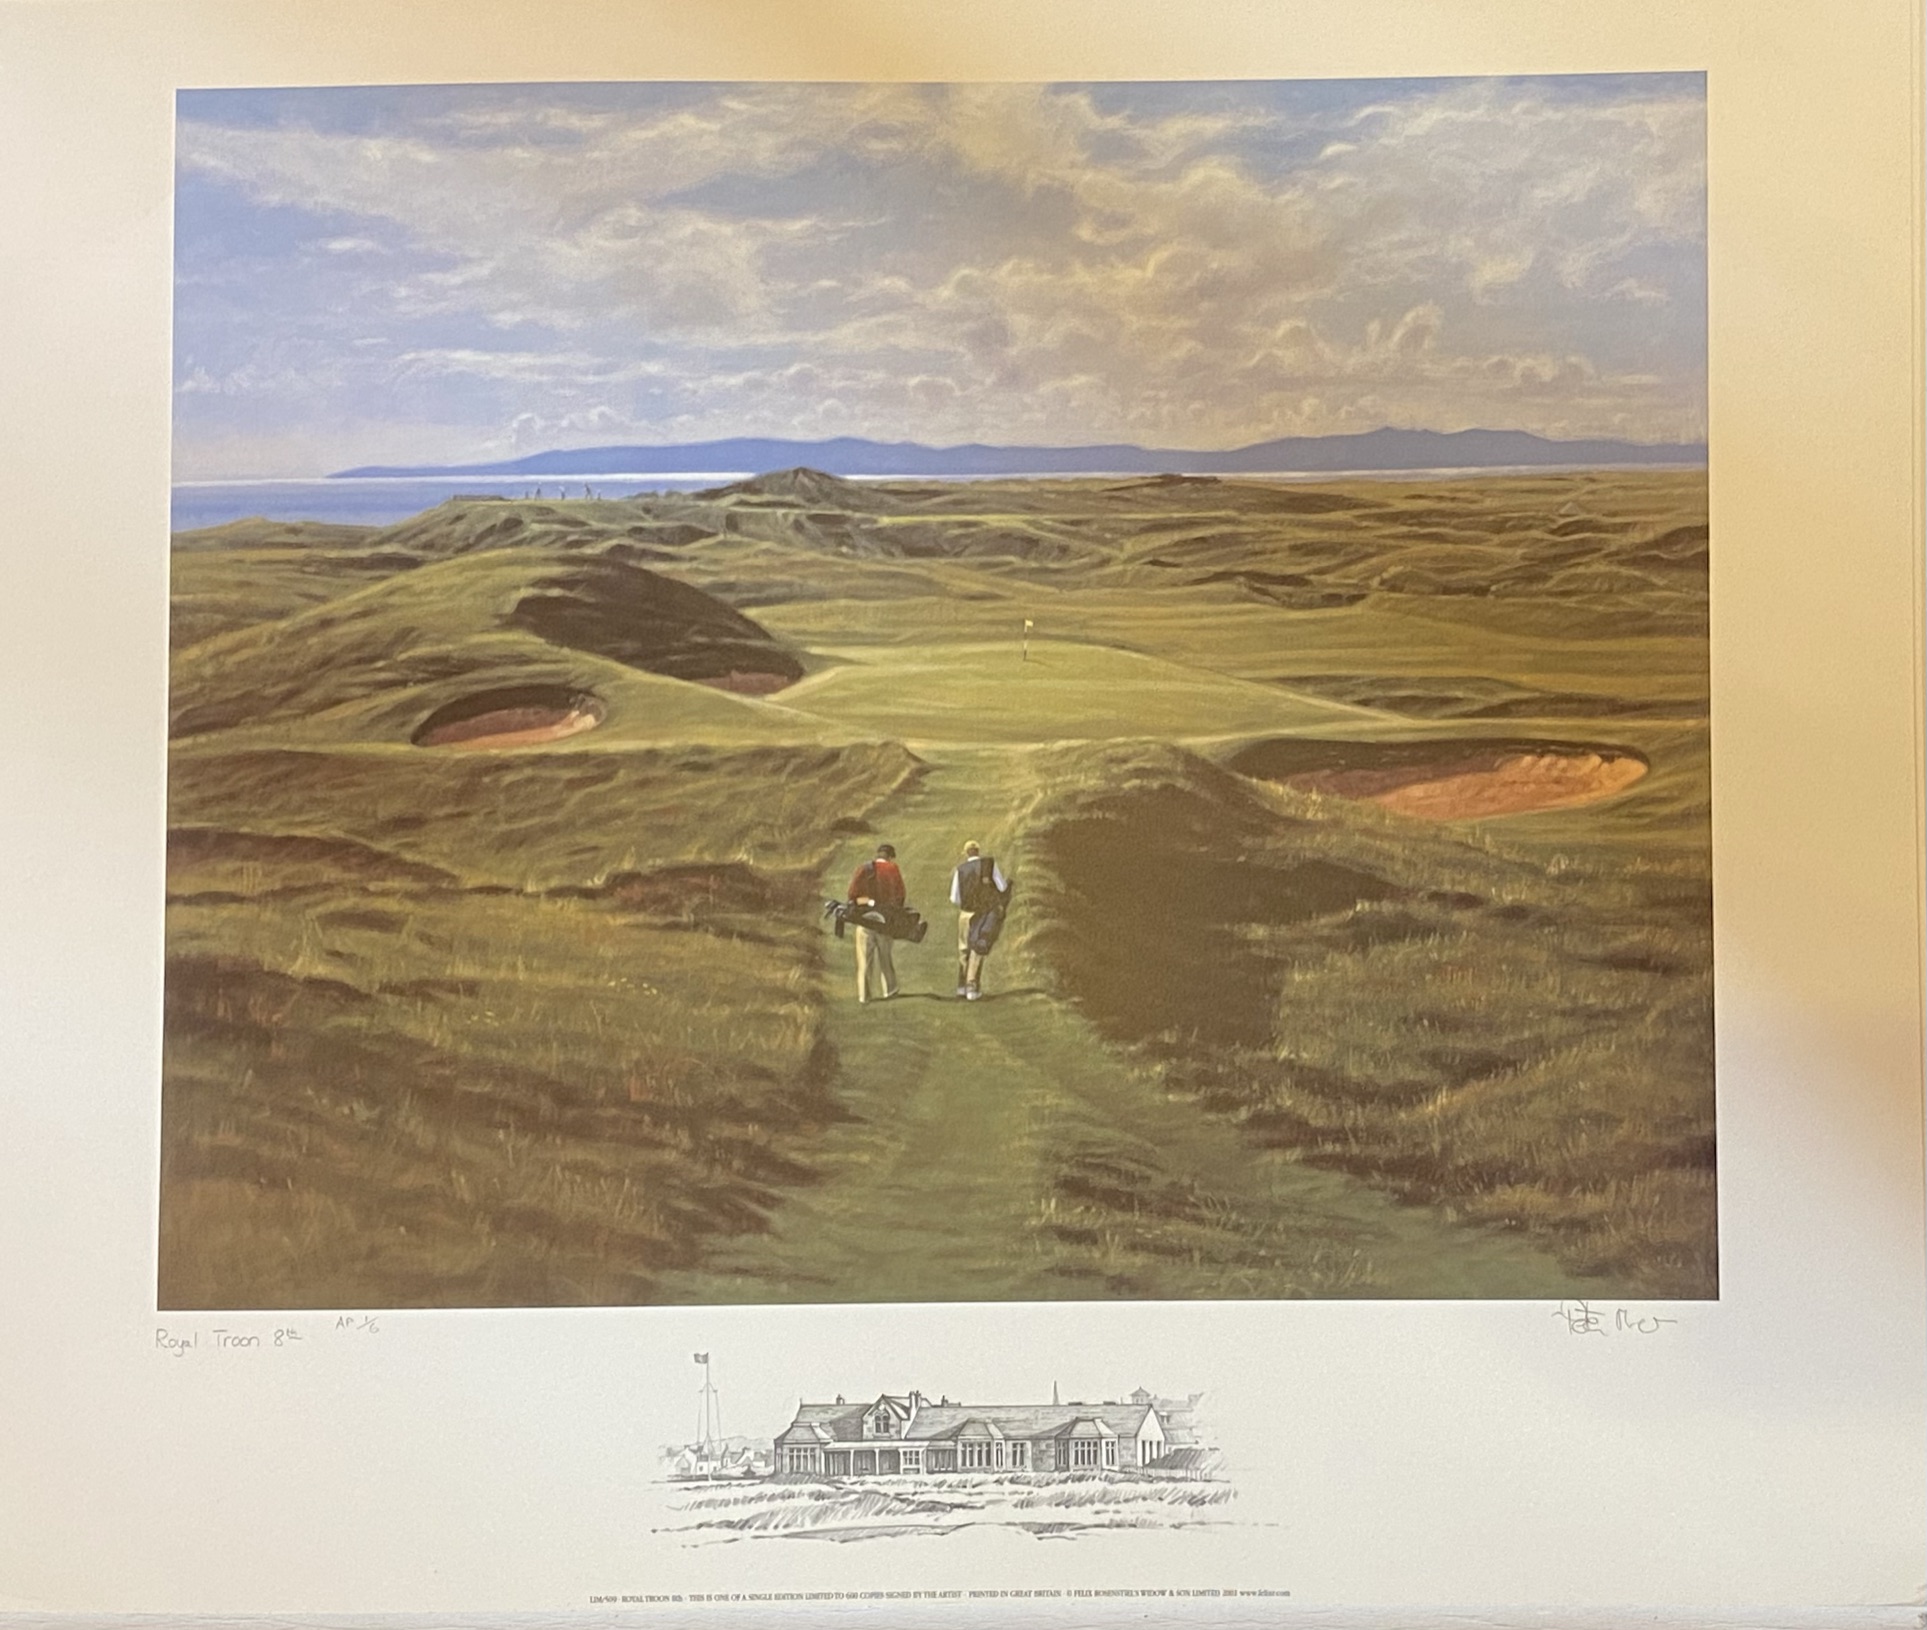 Royal Troon 8th golfing print signed A/P by Scottish artist Peter Munro - Image 2 of 4